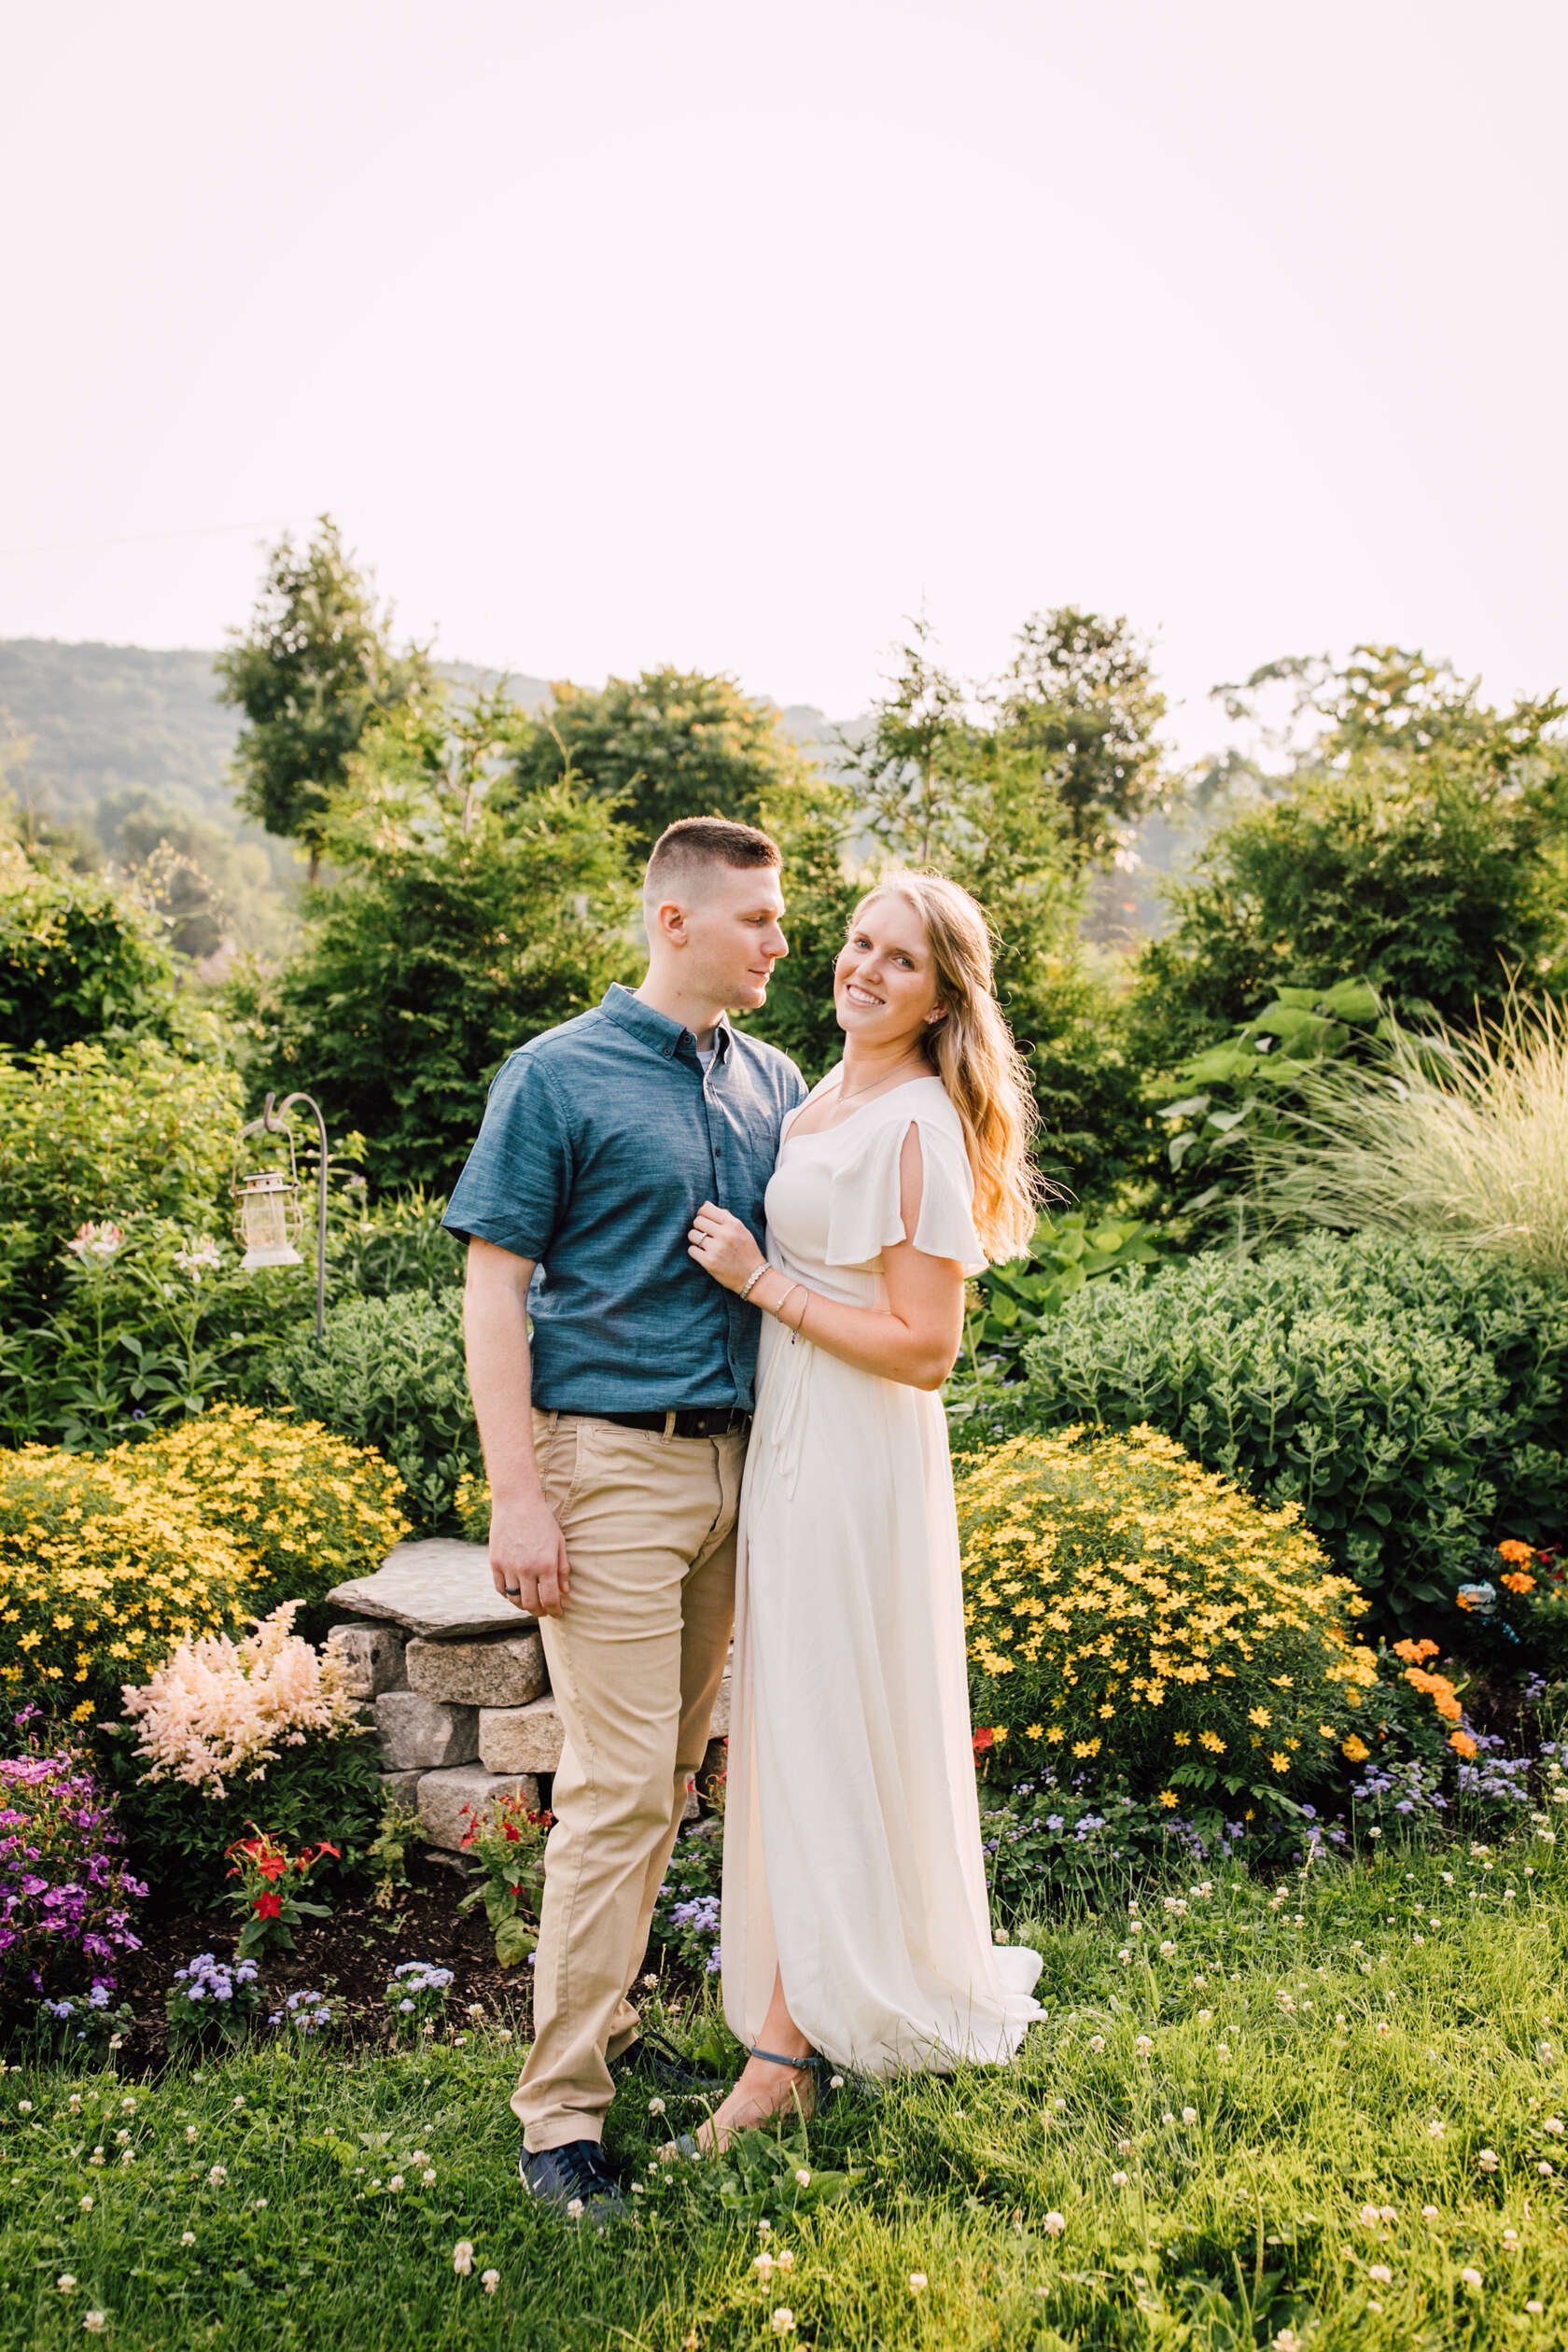  Jake looks at his fiancé while she smiles during their farm engagement photos 